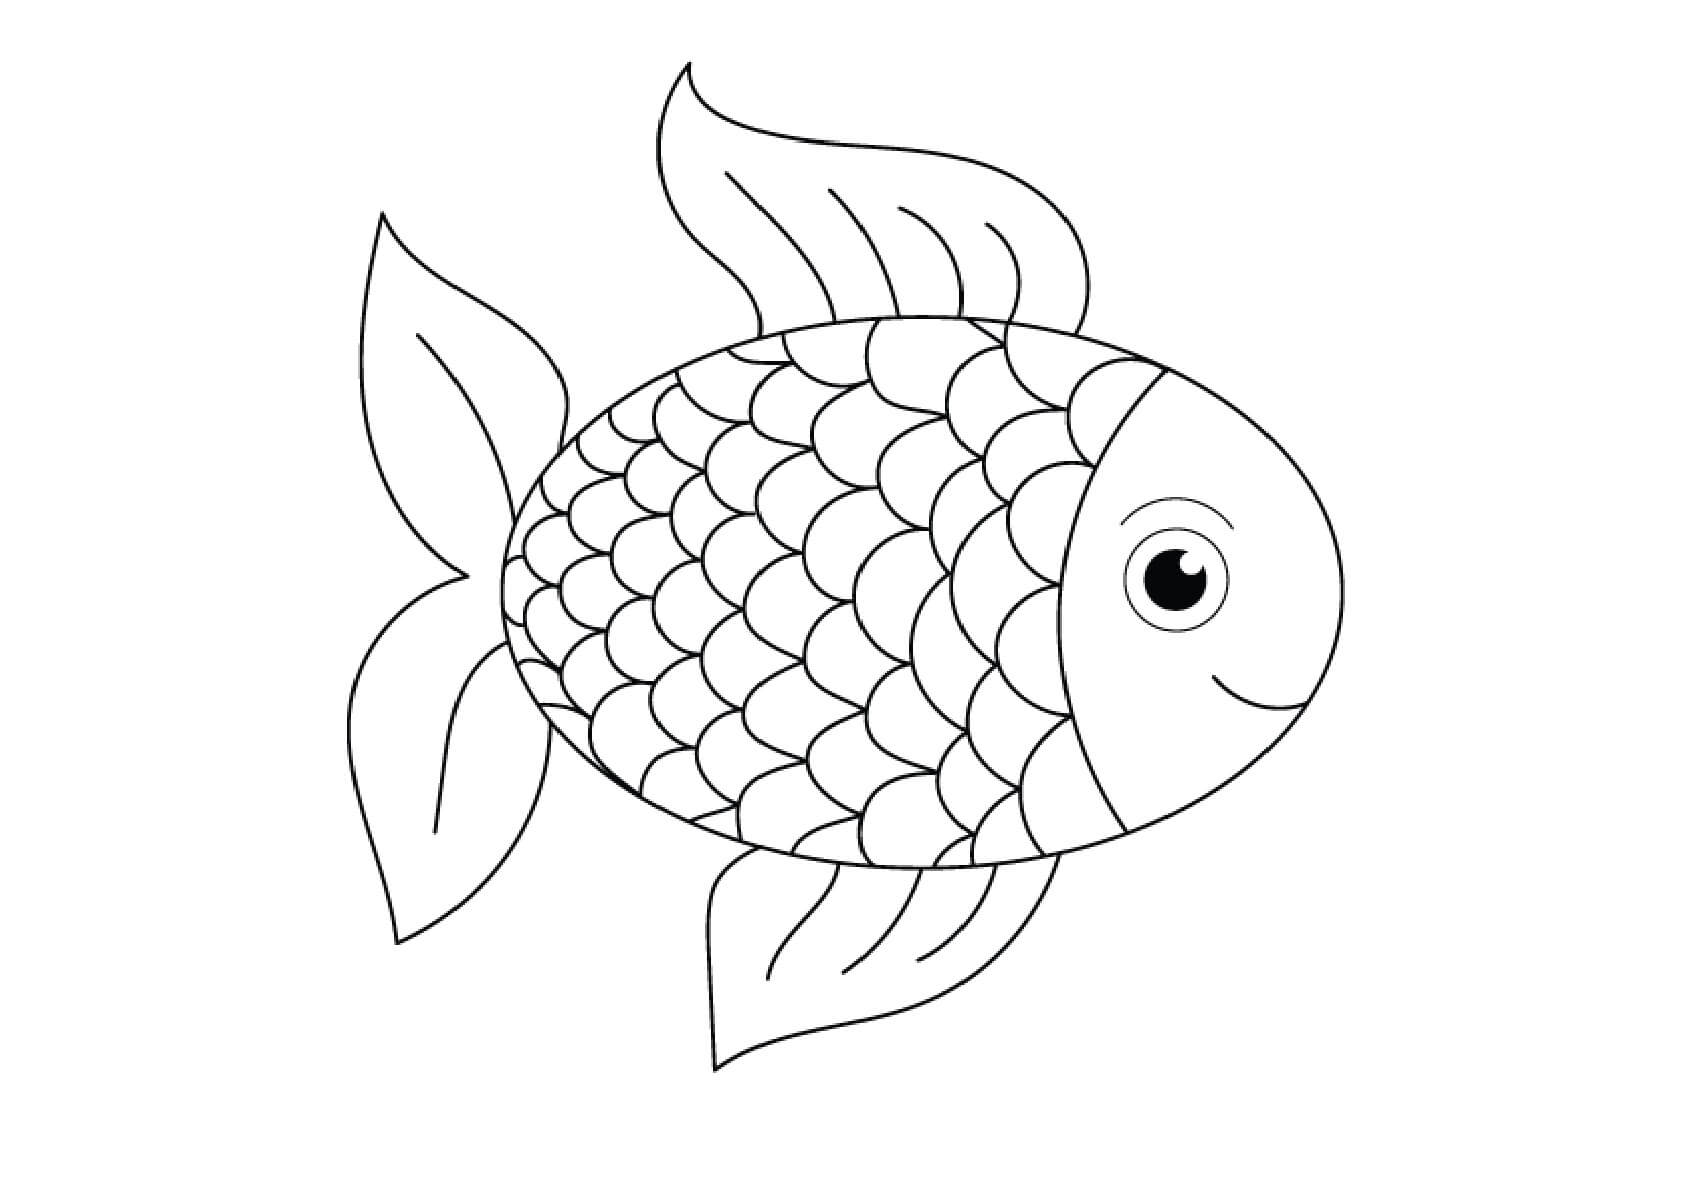 Amazing Rainbow Fish coloring page - Download, Print or Color Online ...